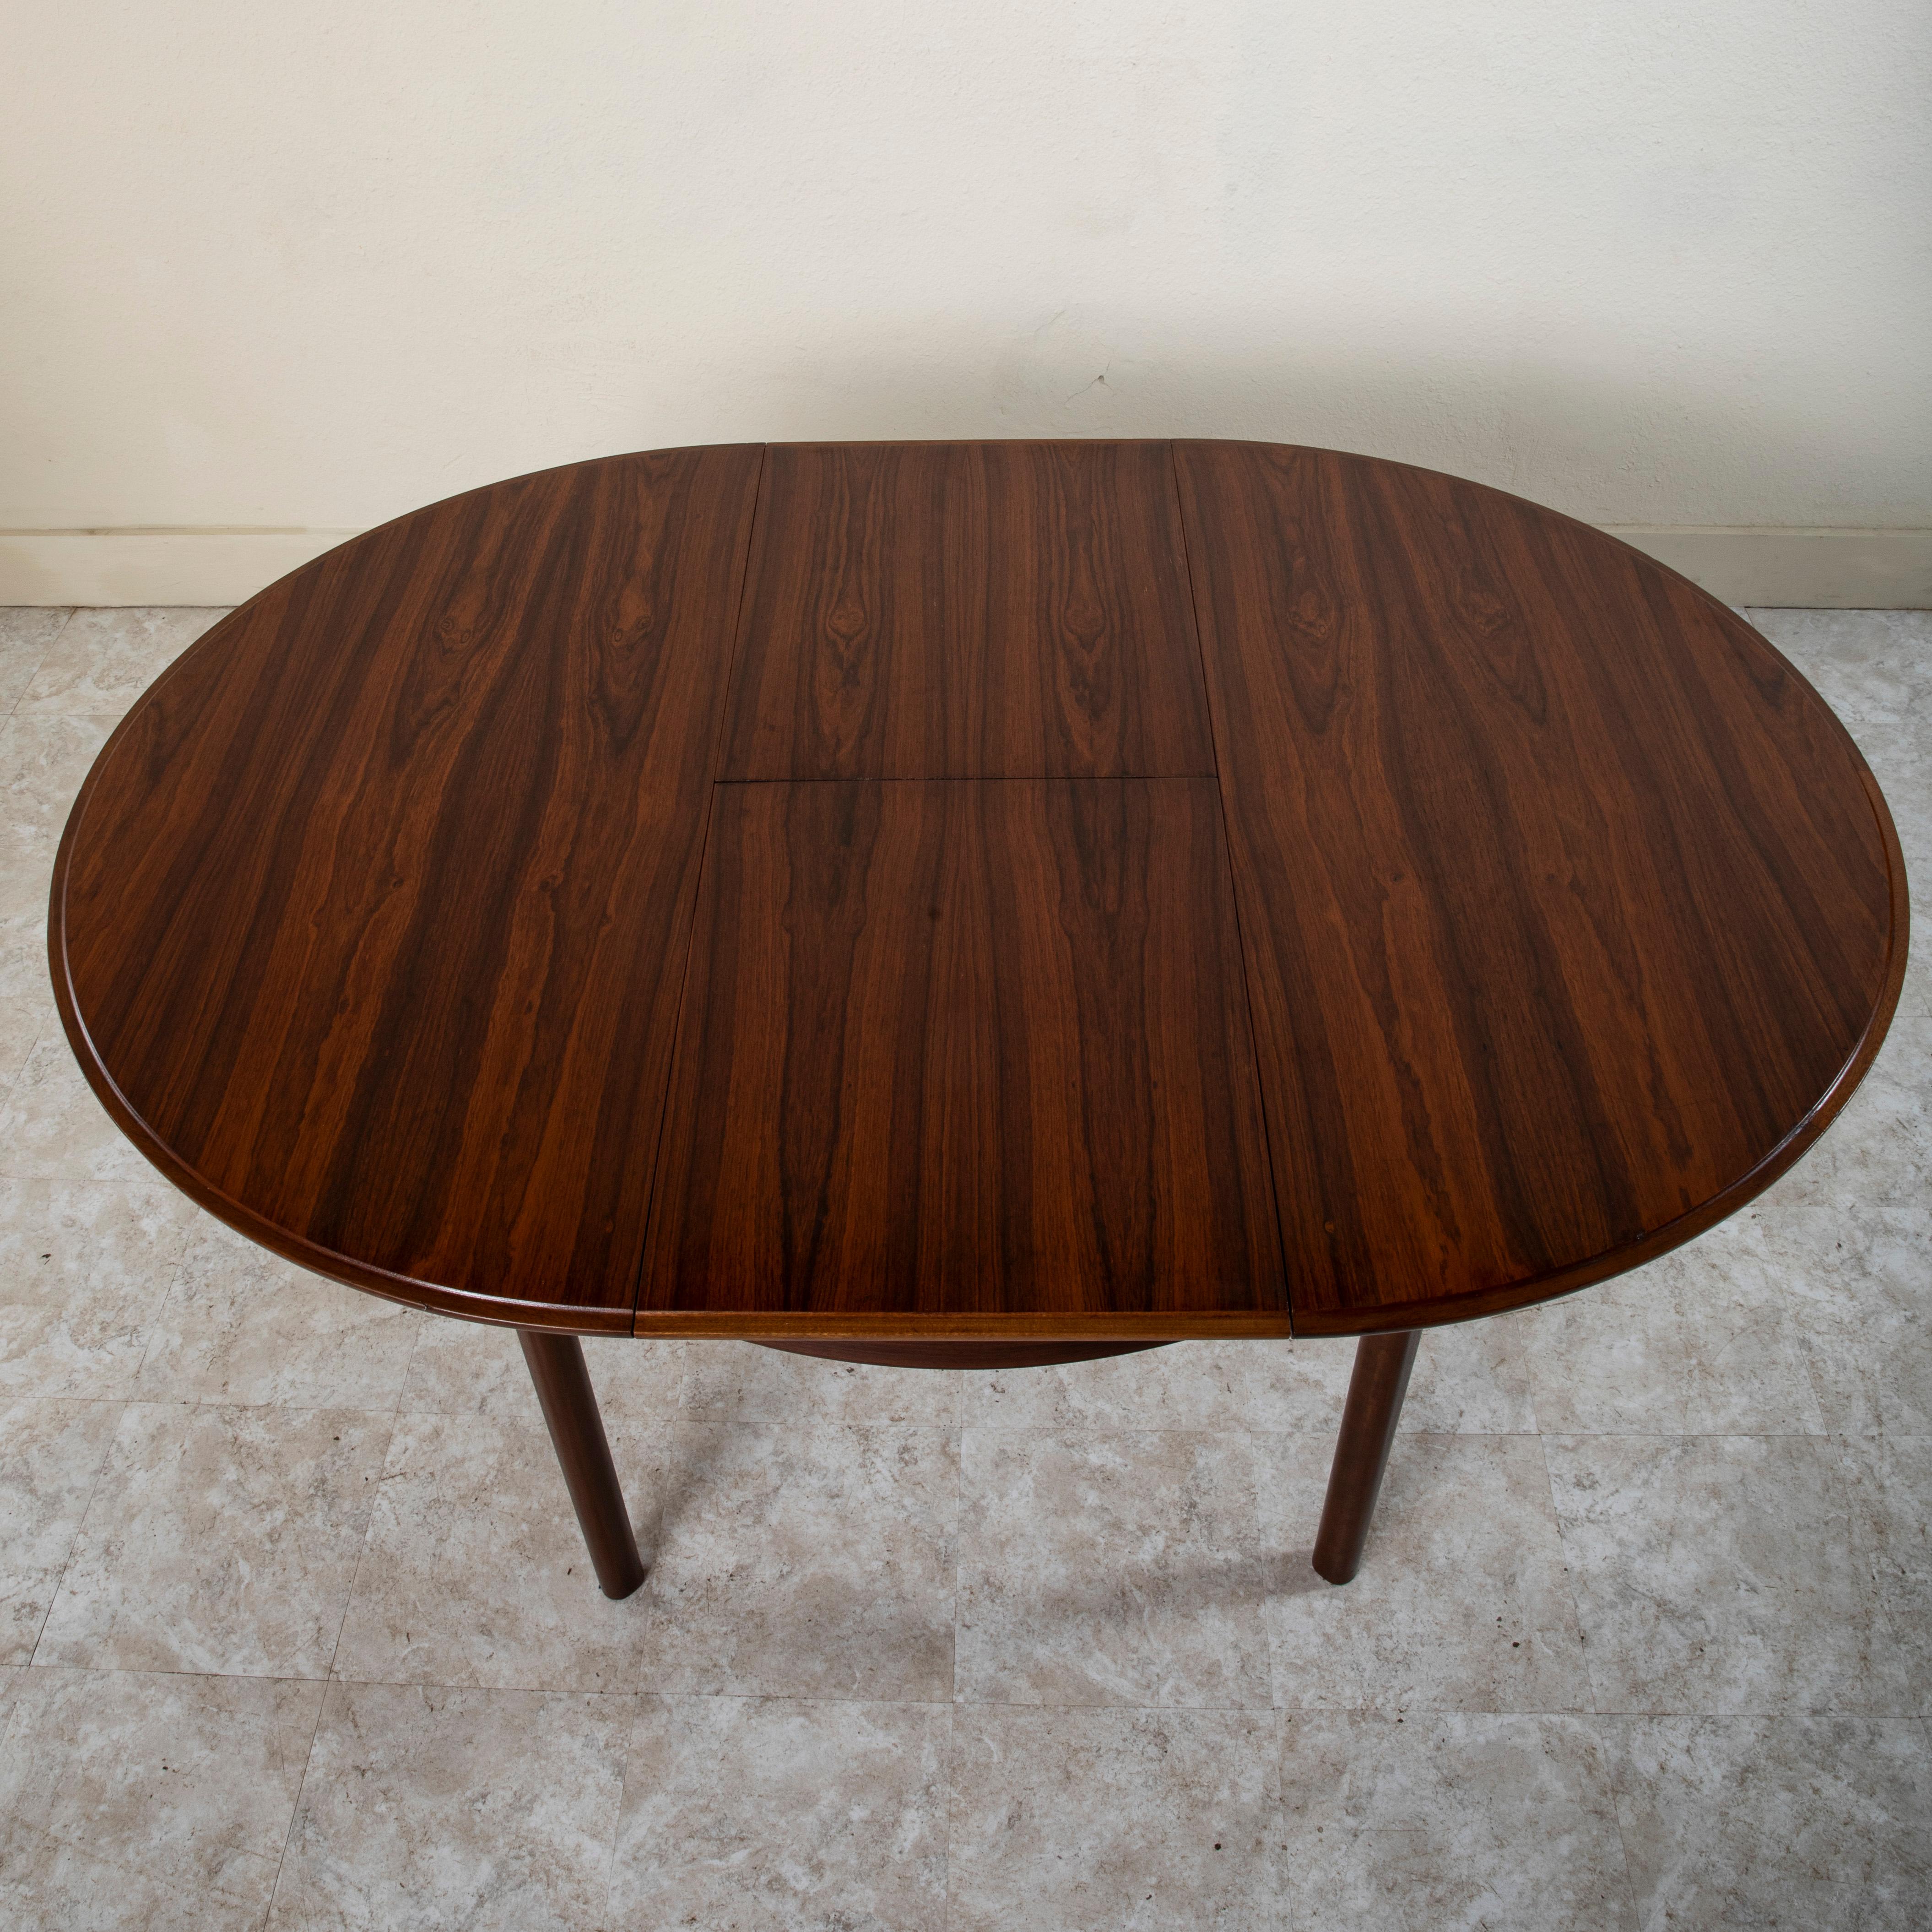 Mid-20th Century Danish Rosewood Round to Oval Dining Table, Collapsible Leaf For Sale 3